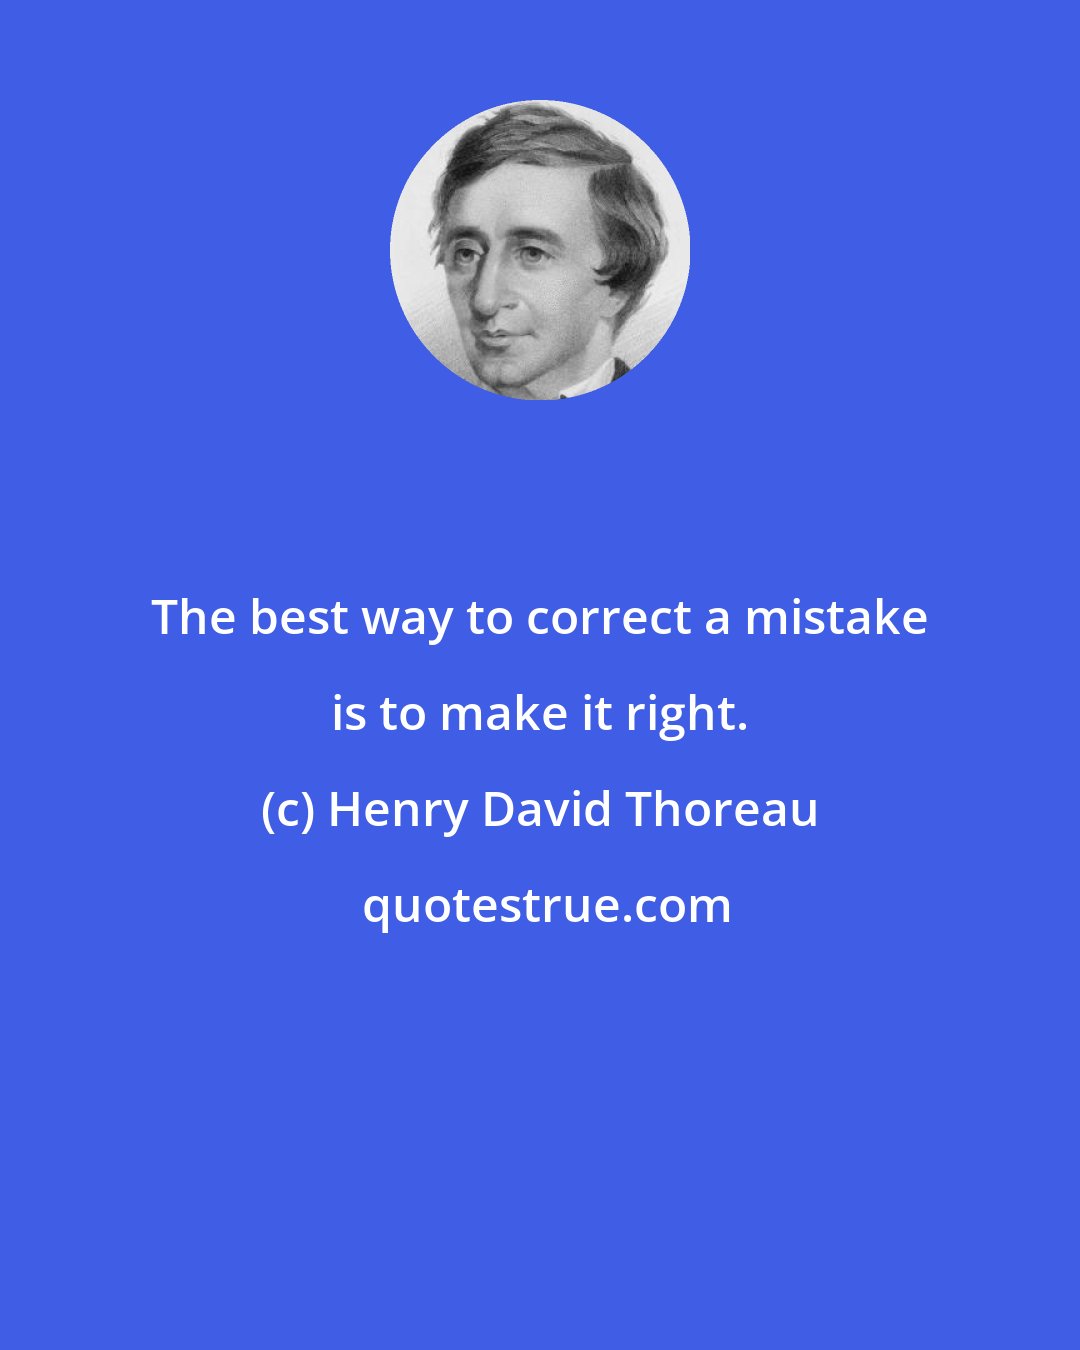 Henry David Thoreau: The best way to correct a mistake is to make it right.